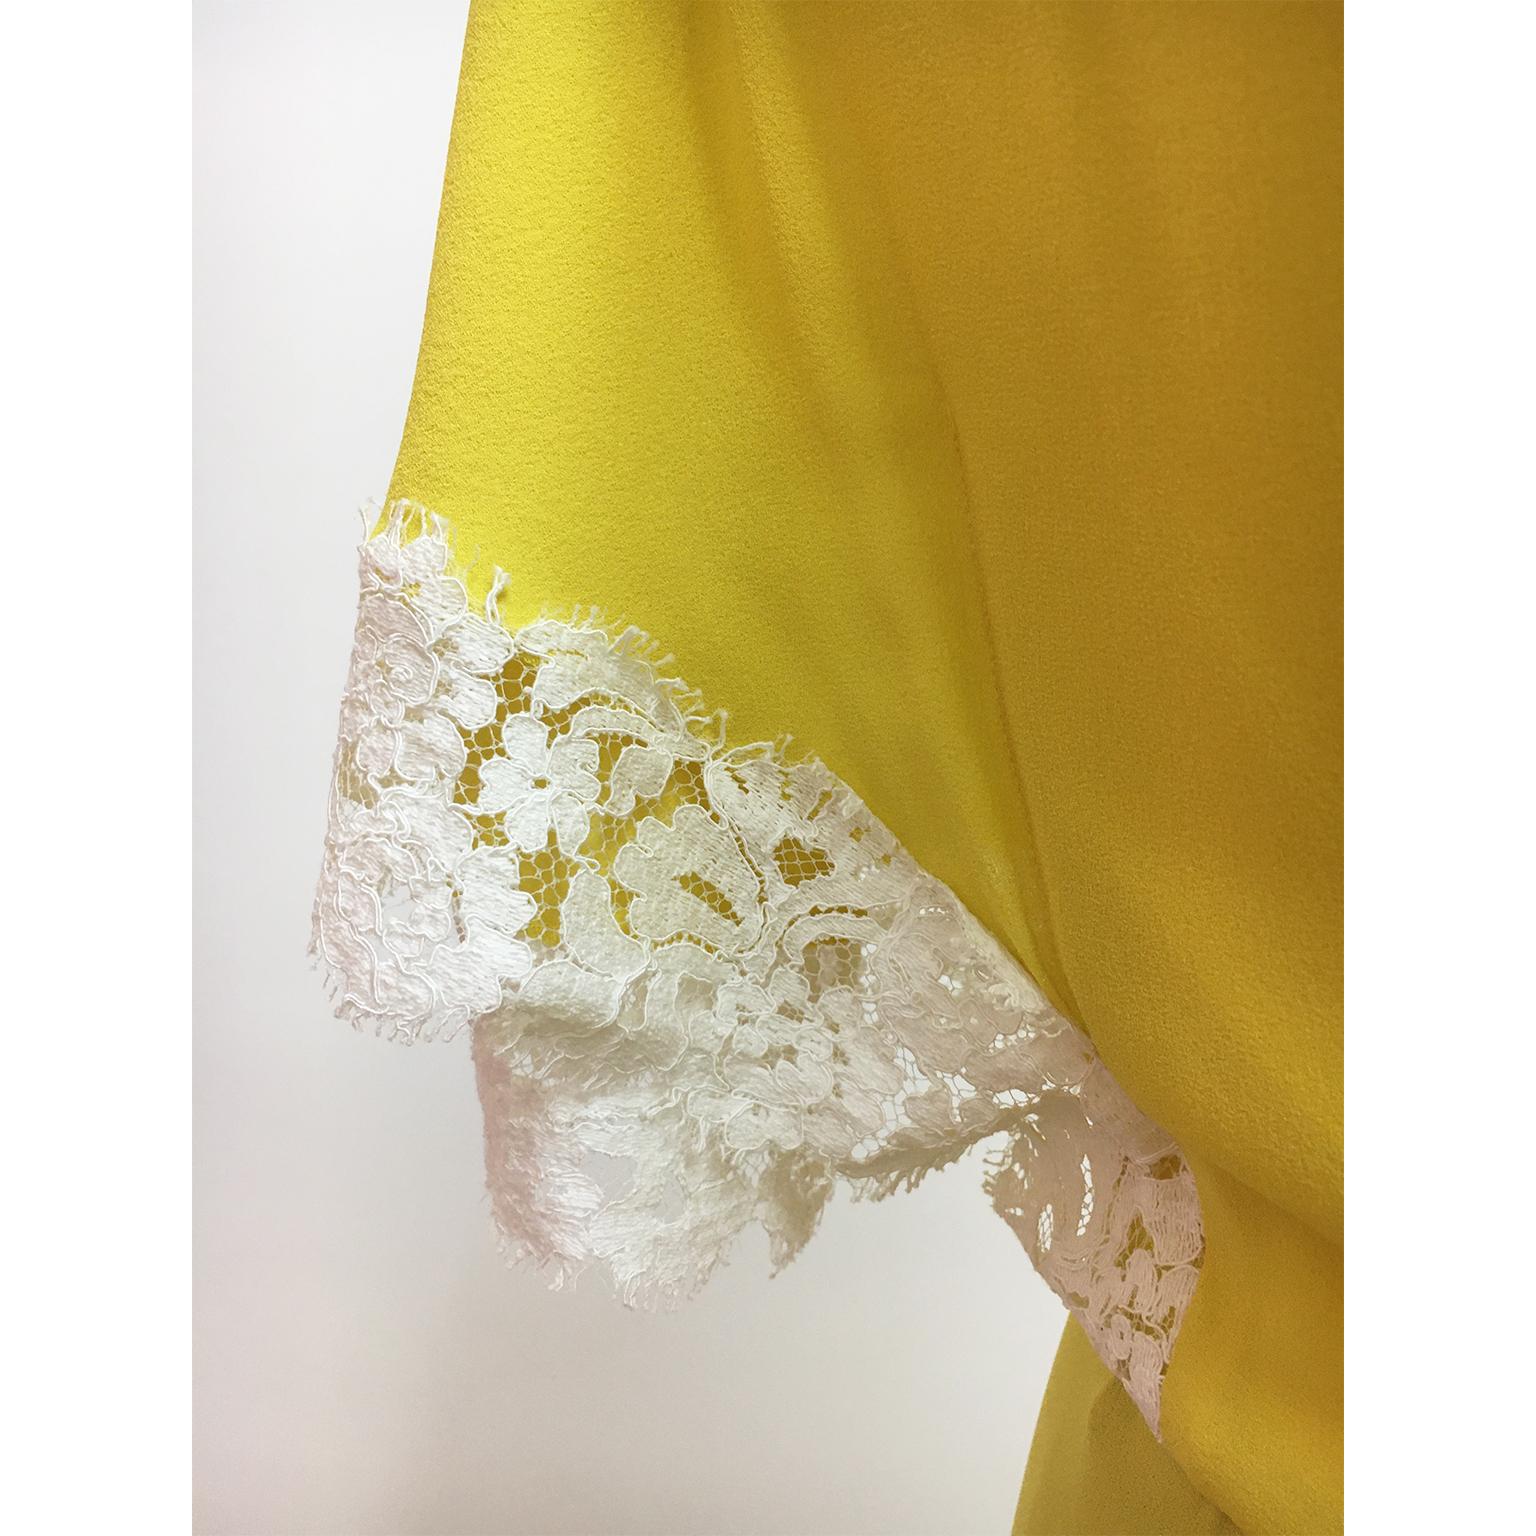 Nina Ricci Olivier Theyskens Sample Dress Gown Yellow Black Lace circa 2010 For Sale 2